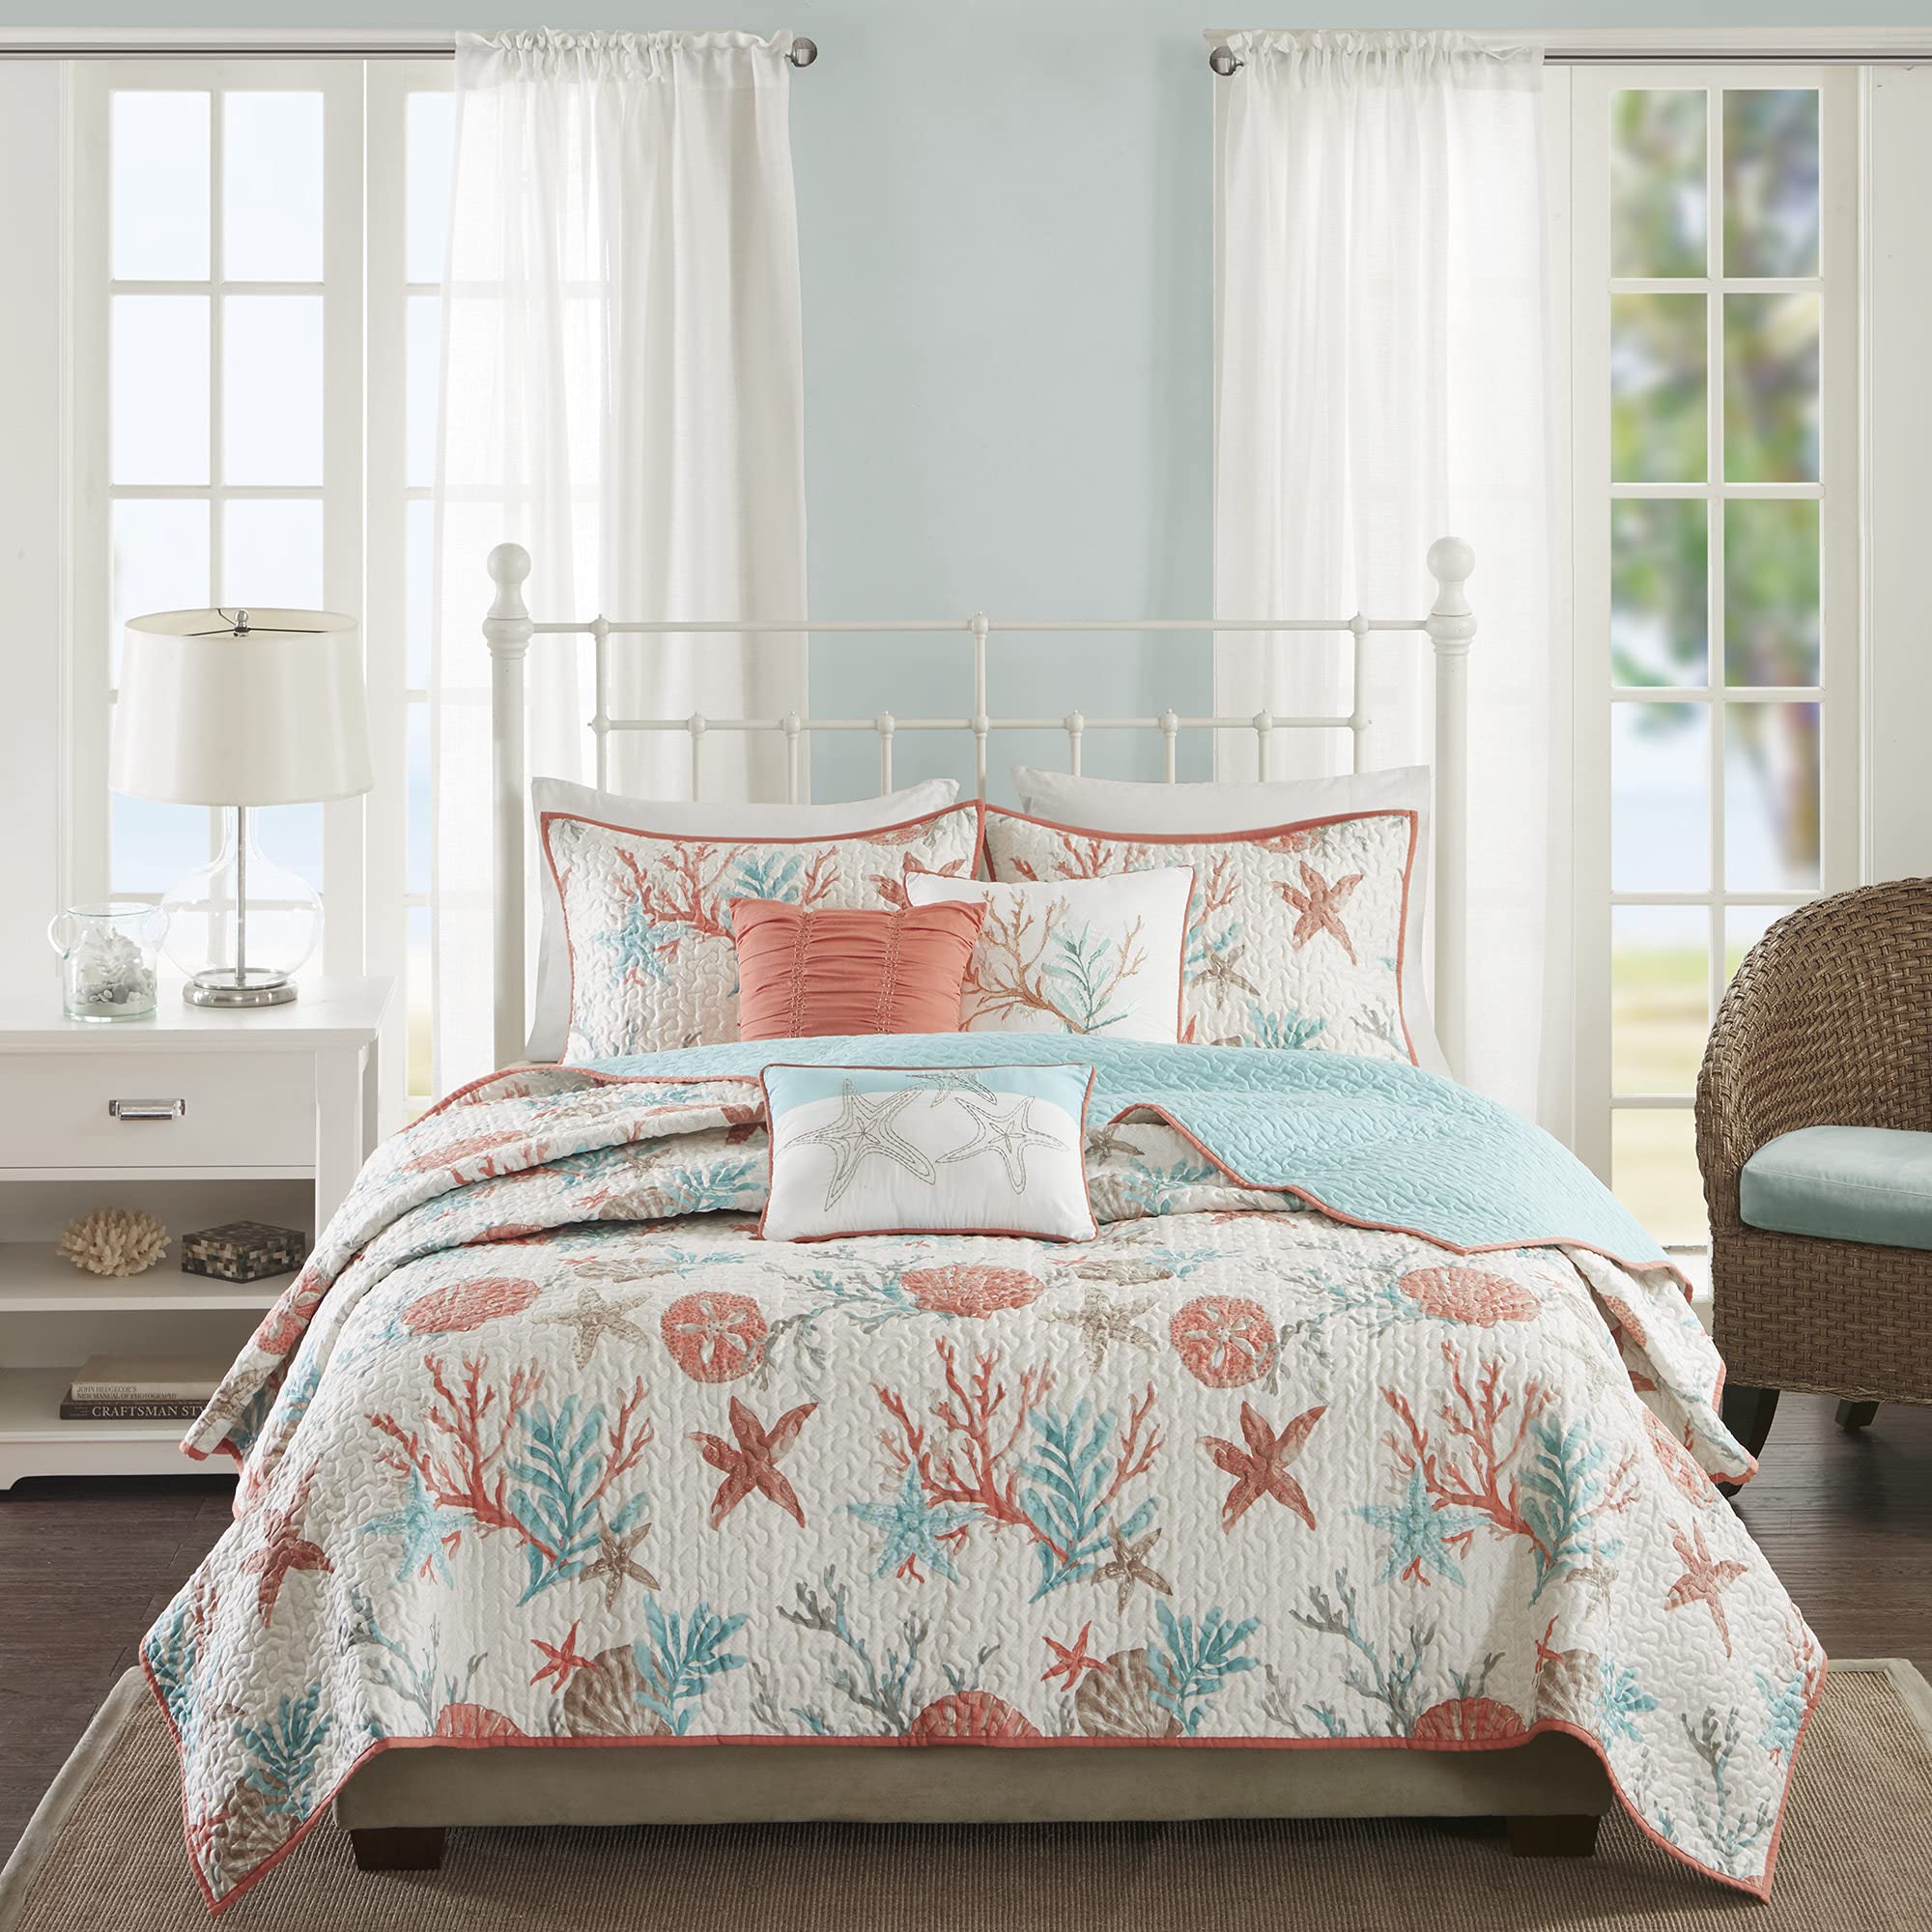 Book Cover Madison Park Quilt Cottage Coastal Design - All Season, Breathable Coverlet Bedspread Lightweight Bedding Set, Matching Shams, Decorative Pillow, Pebble Beach, Coral Full/Queen(90